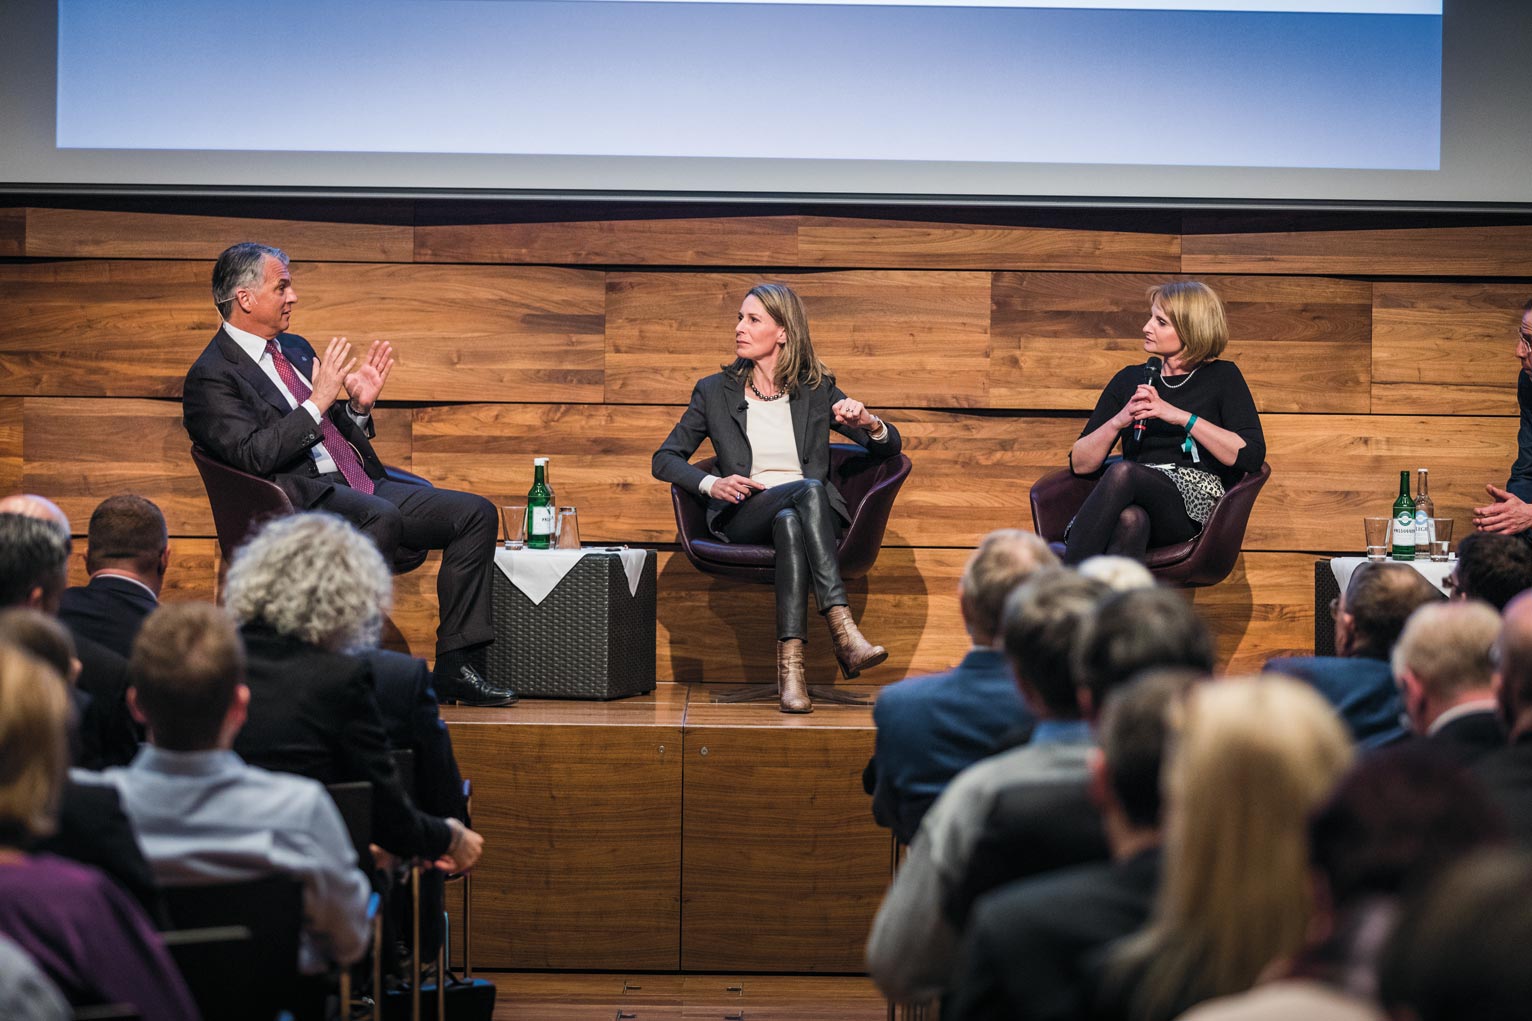 Moderator Katja Gentinetta (in the middle) with Sergio P. Ermotti and Christina Kehl on Switzerland’s potential to overcome obstacles and continue the success story of Swiss finance.